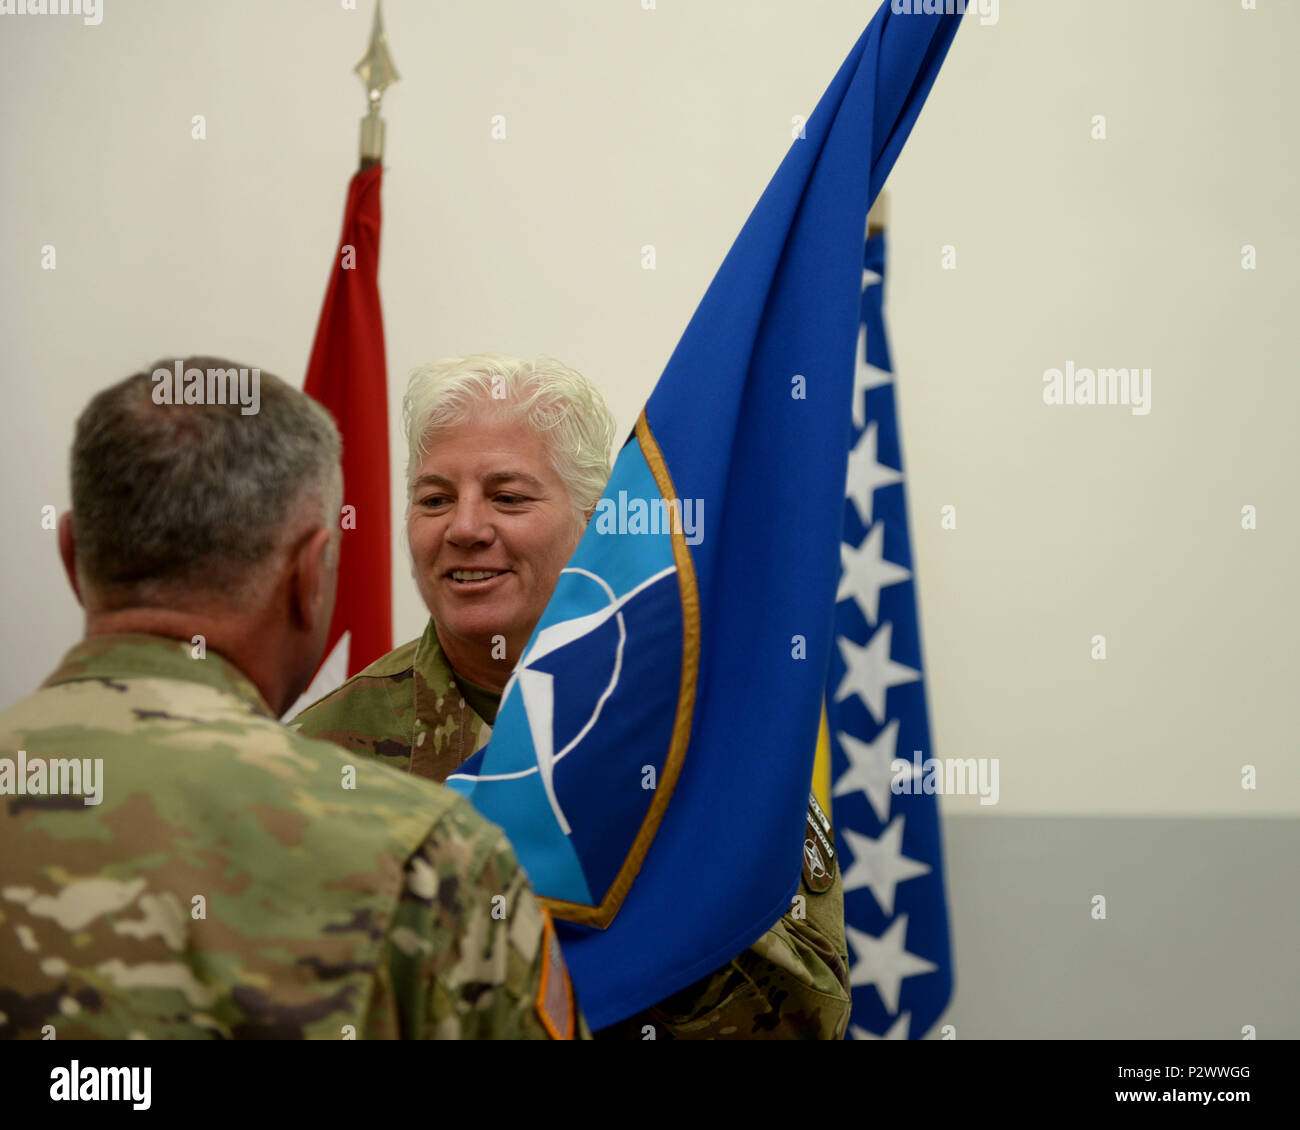 Command Sgt. Maj. Harley J. Schwind Jr. passes the colors to Brig. Gen. Giselle Wilz, NATO Headquarters Sarajevo commander, indicating the return of the responsibilities that where entrusted upon him during a ceremony on Camp Butmir, Bosnia and Herzegovina (BiH), Aug. 2, 2016. Stock Photo